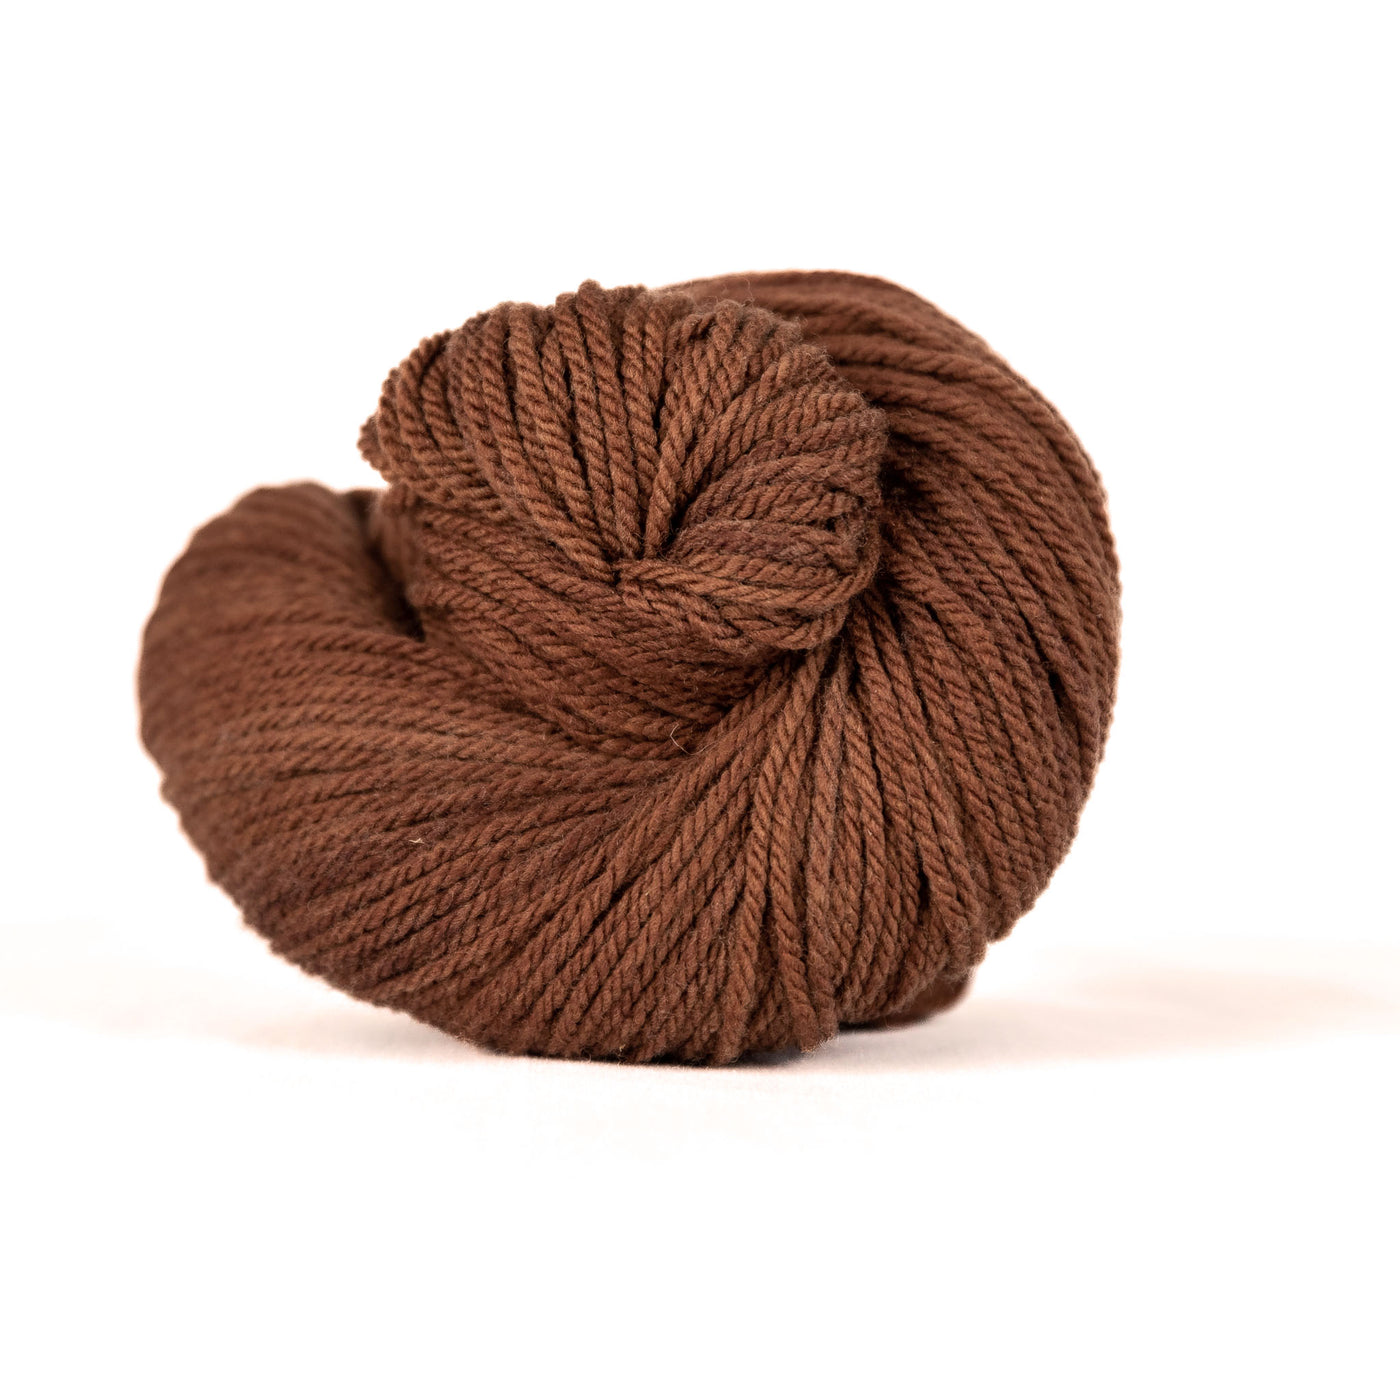 Cora 3ply Worsted Weight Yarn - Chestnut